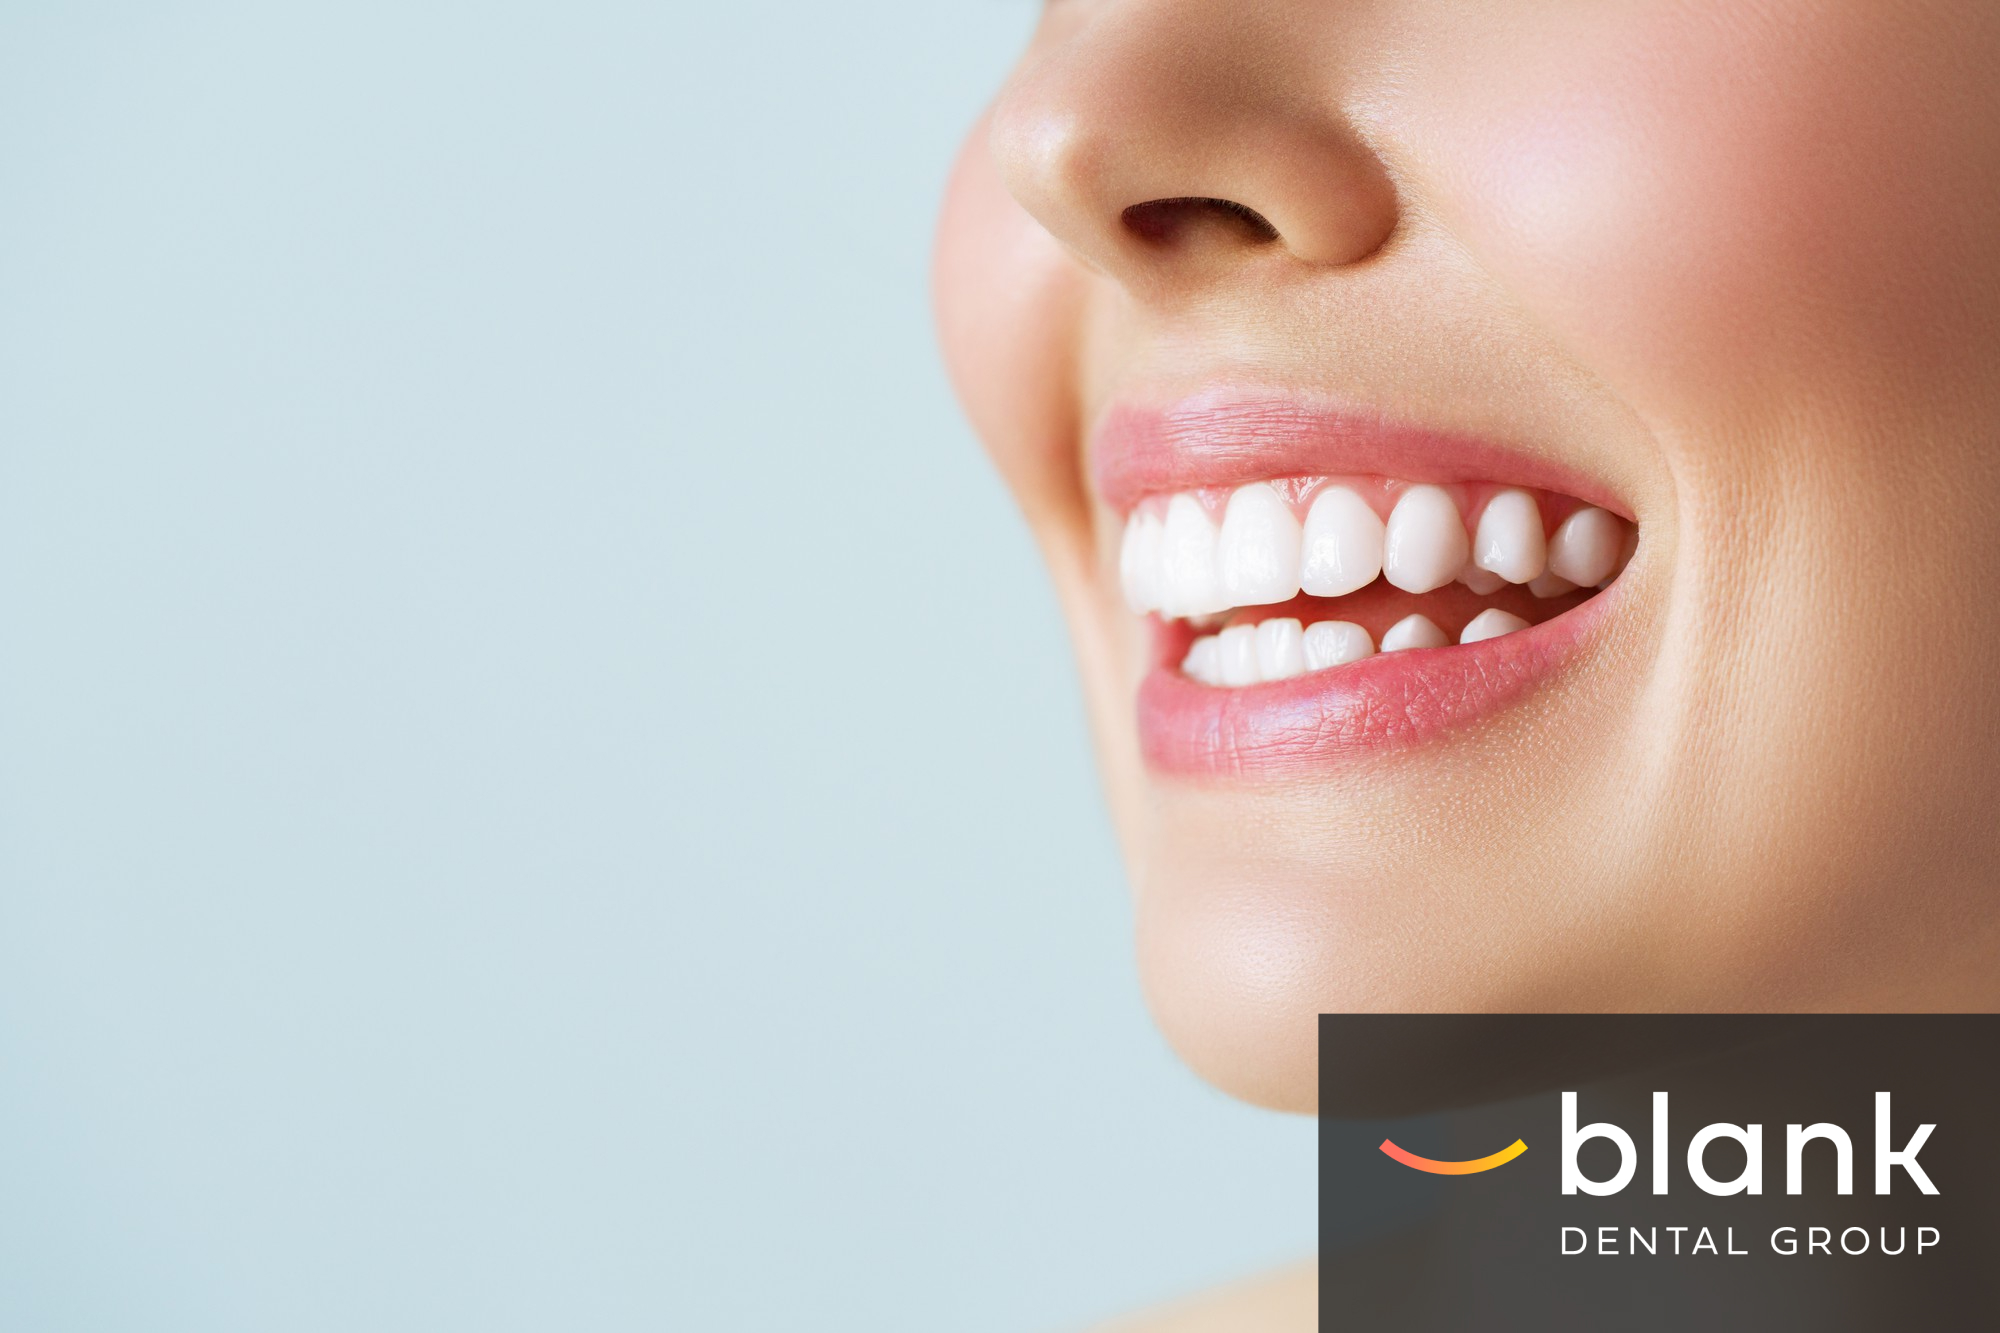 A close-up of a smiling patient with bright teeth at Blank Dental Group.